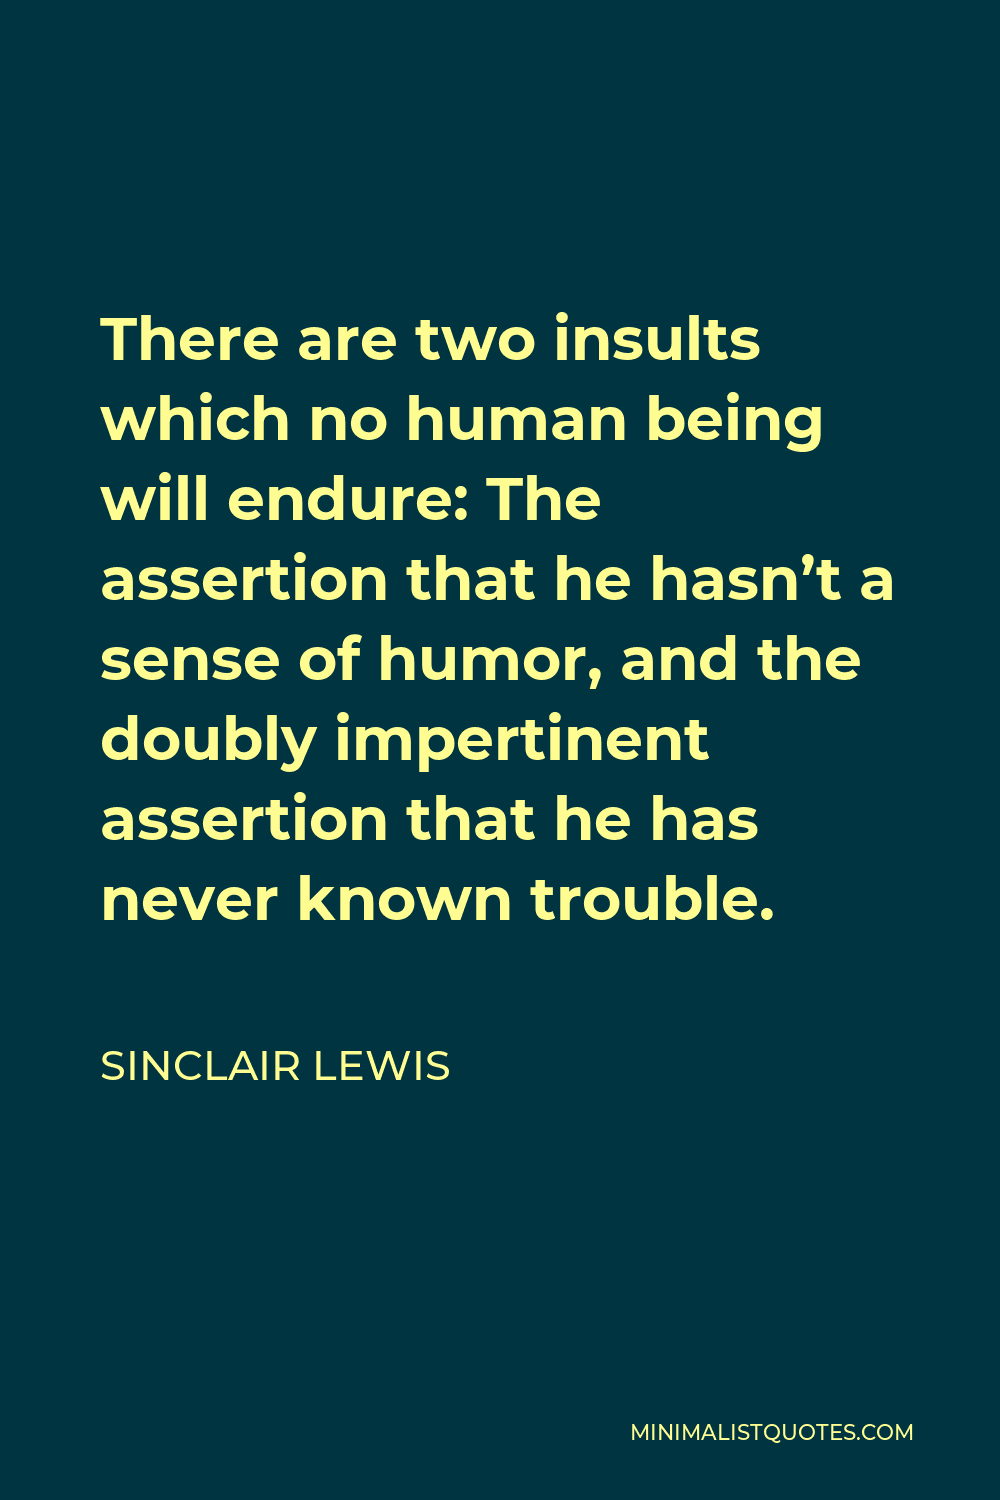 Sinclair Lewis Quote - There are two insults which no human being will endure: The assertion that he hasn’t a sense of humor, and the doubly impertinent assertion that he has never known trouble.